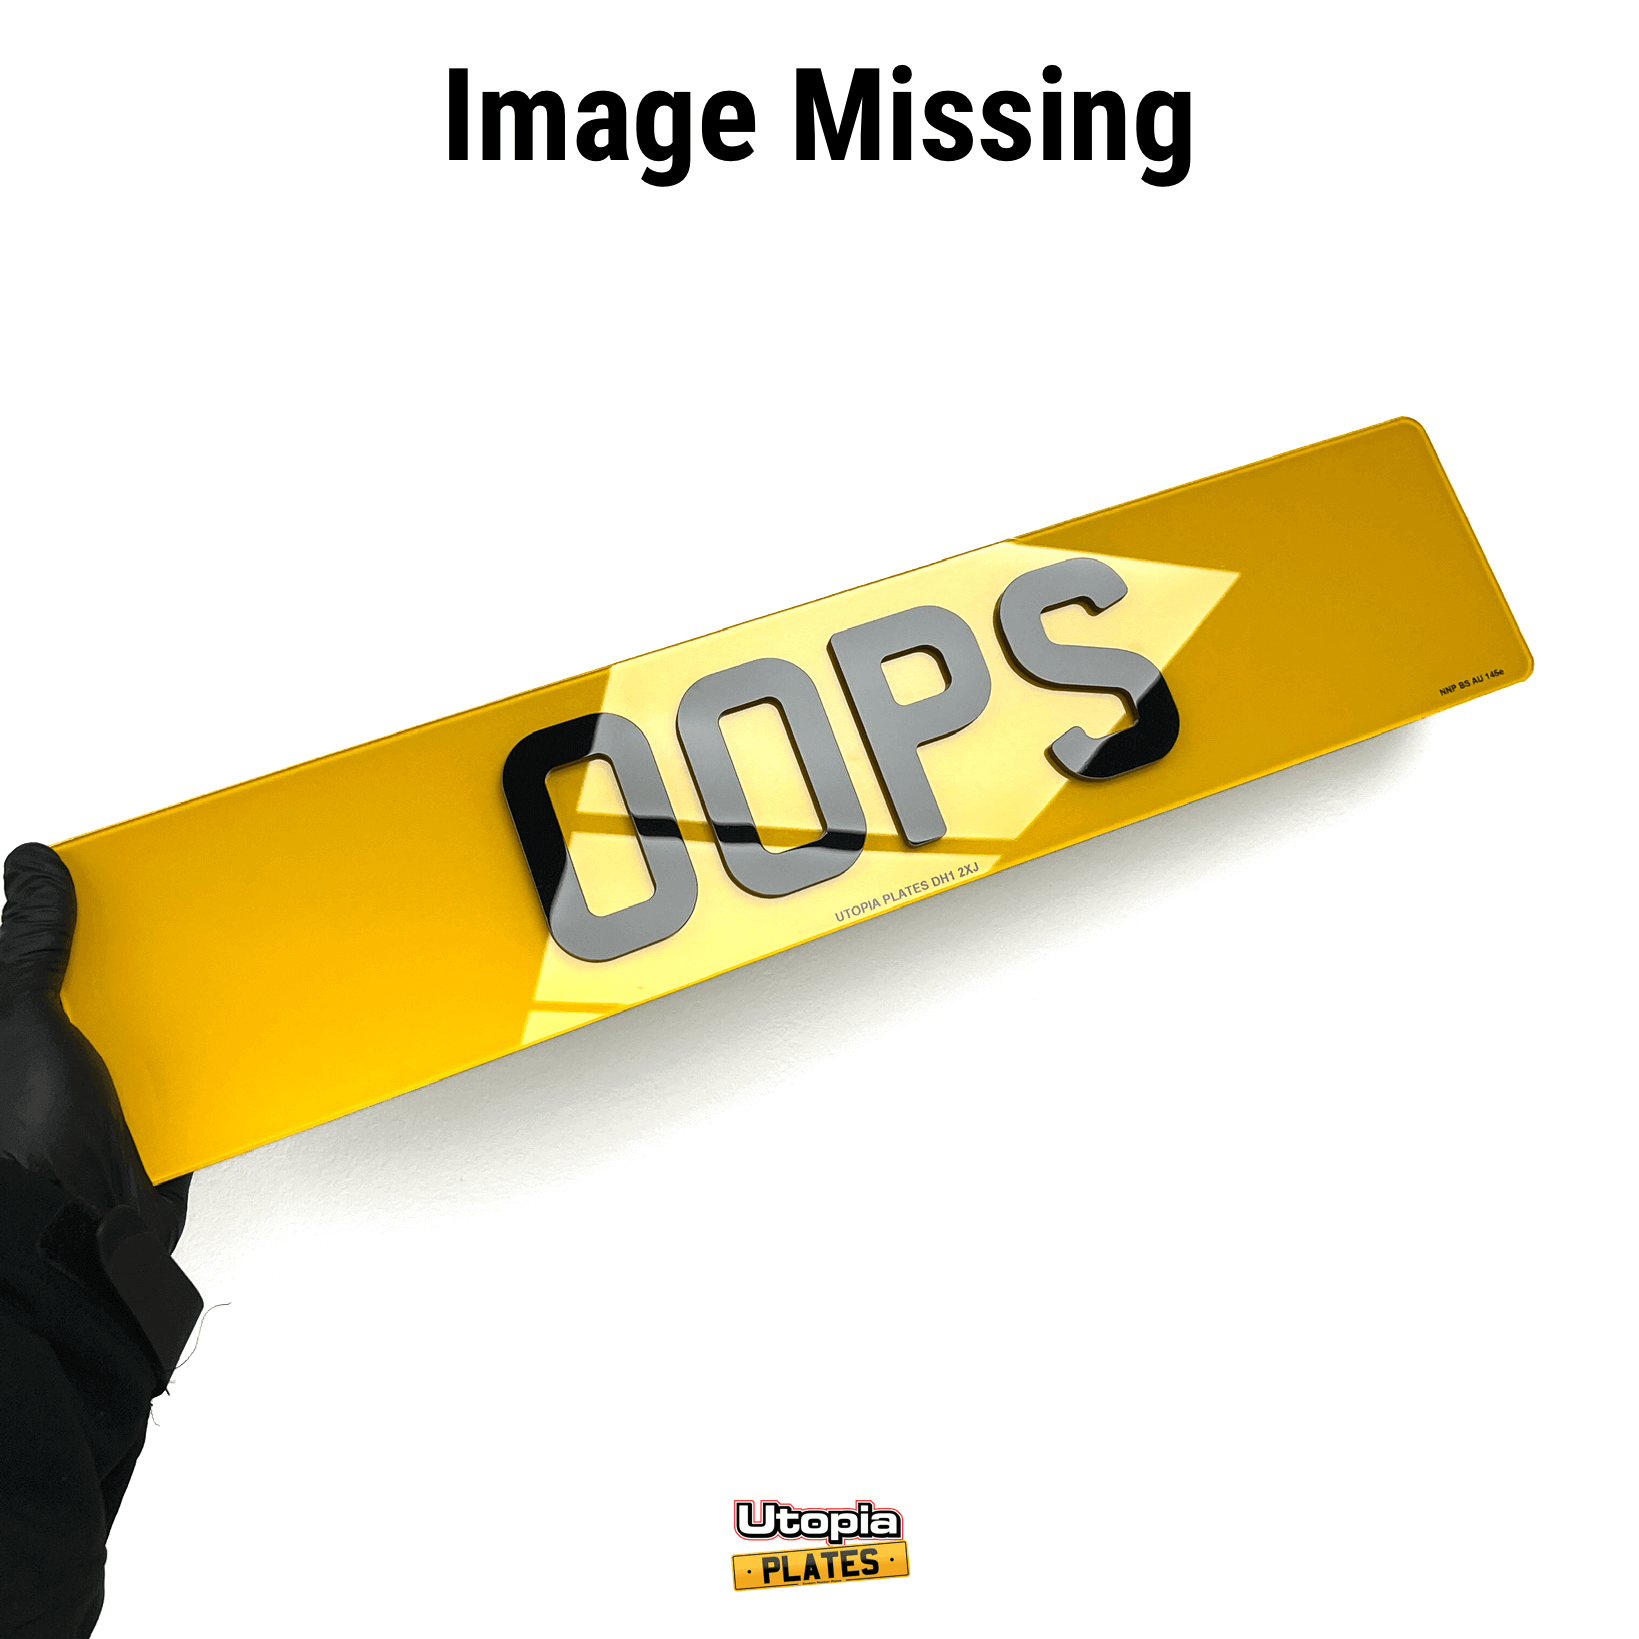 A 4D plate reading "OOPS" and a header saying the requested image is missing.